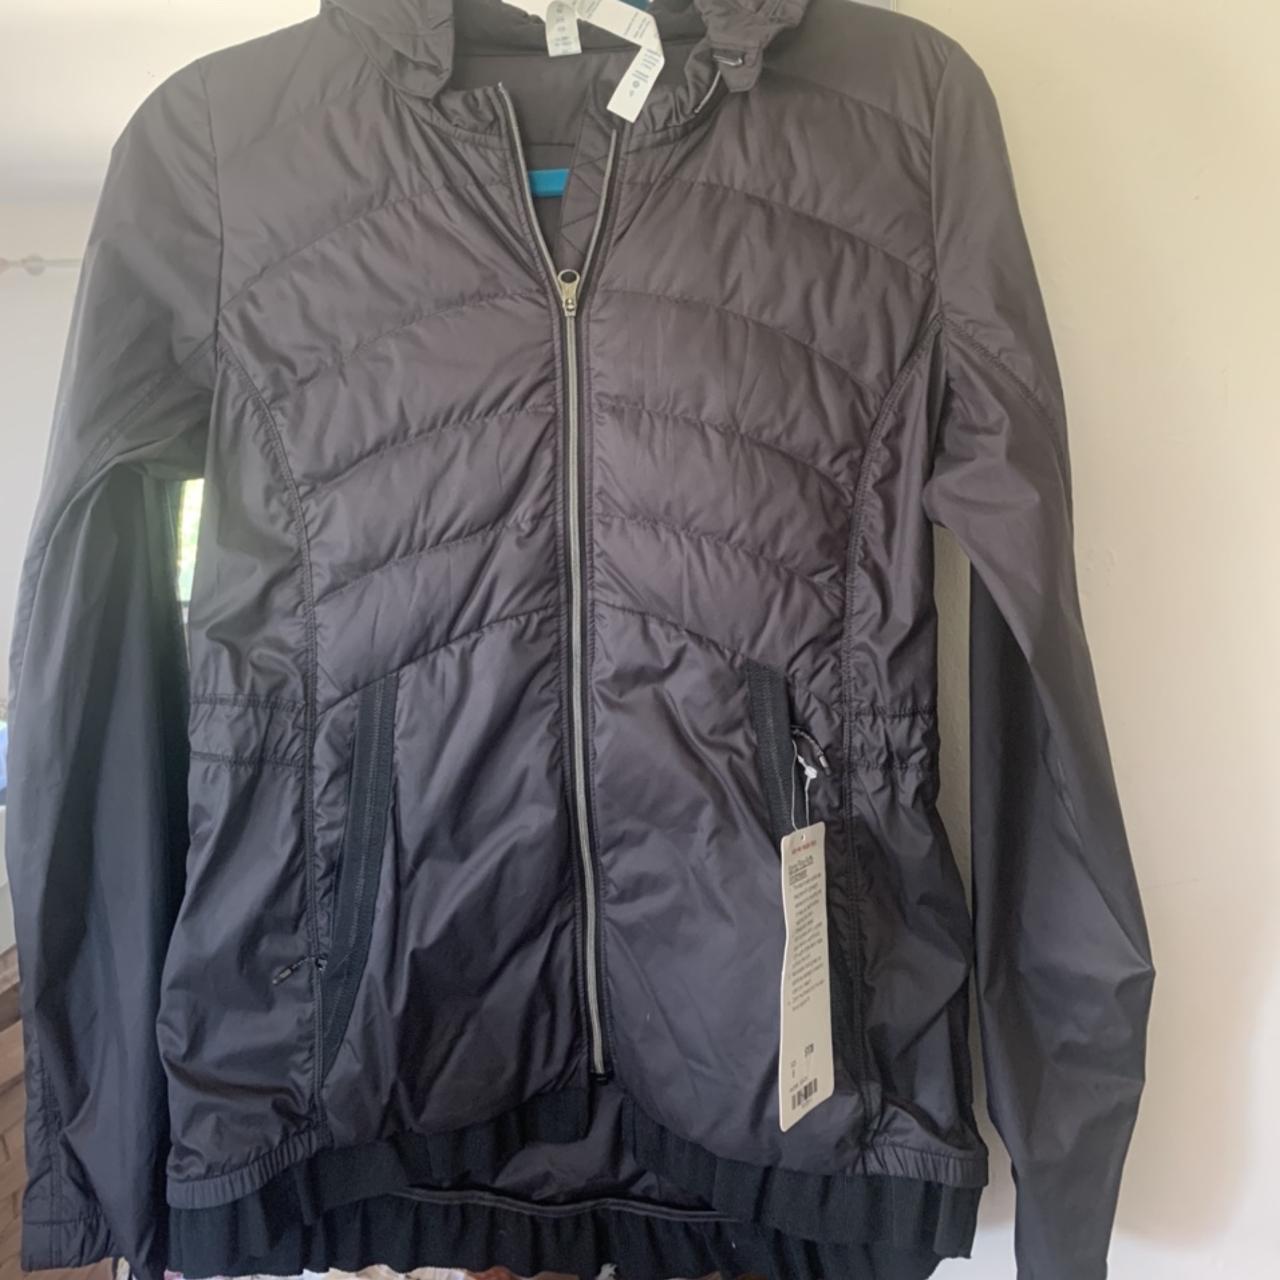 New with tags lululemon puffer jacket. This is the... - Depop